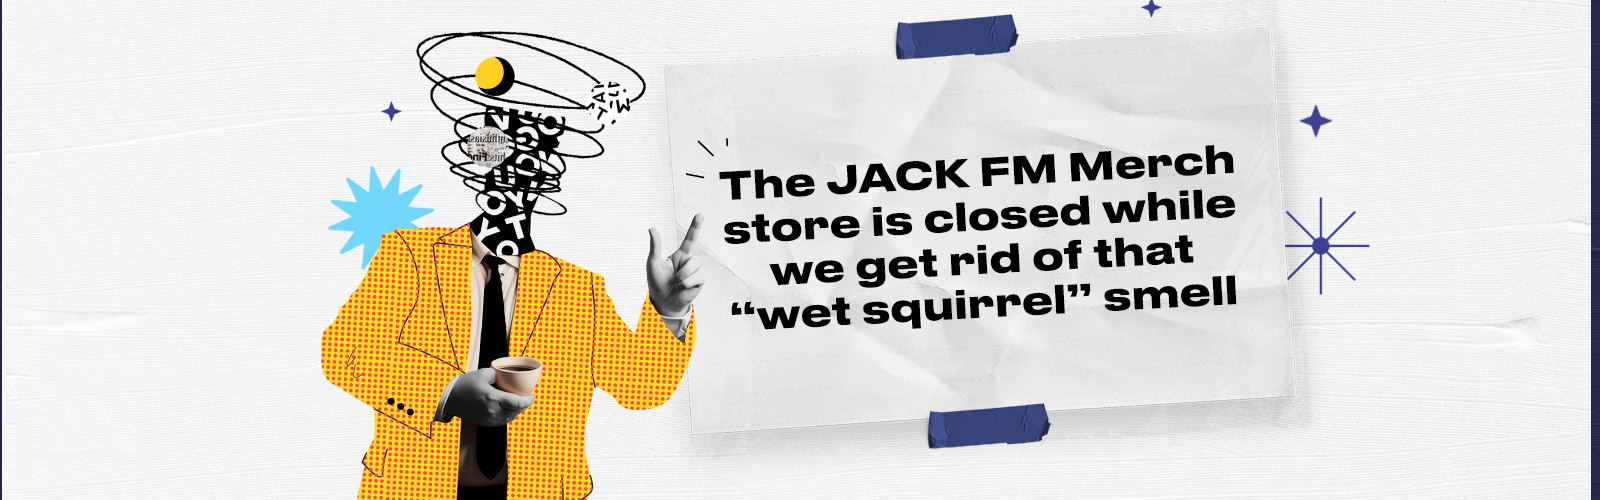 The Jack FM store is temporarily closed